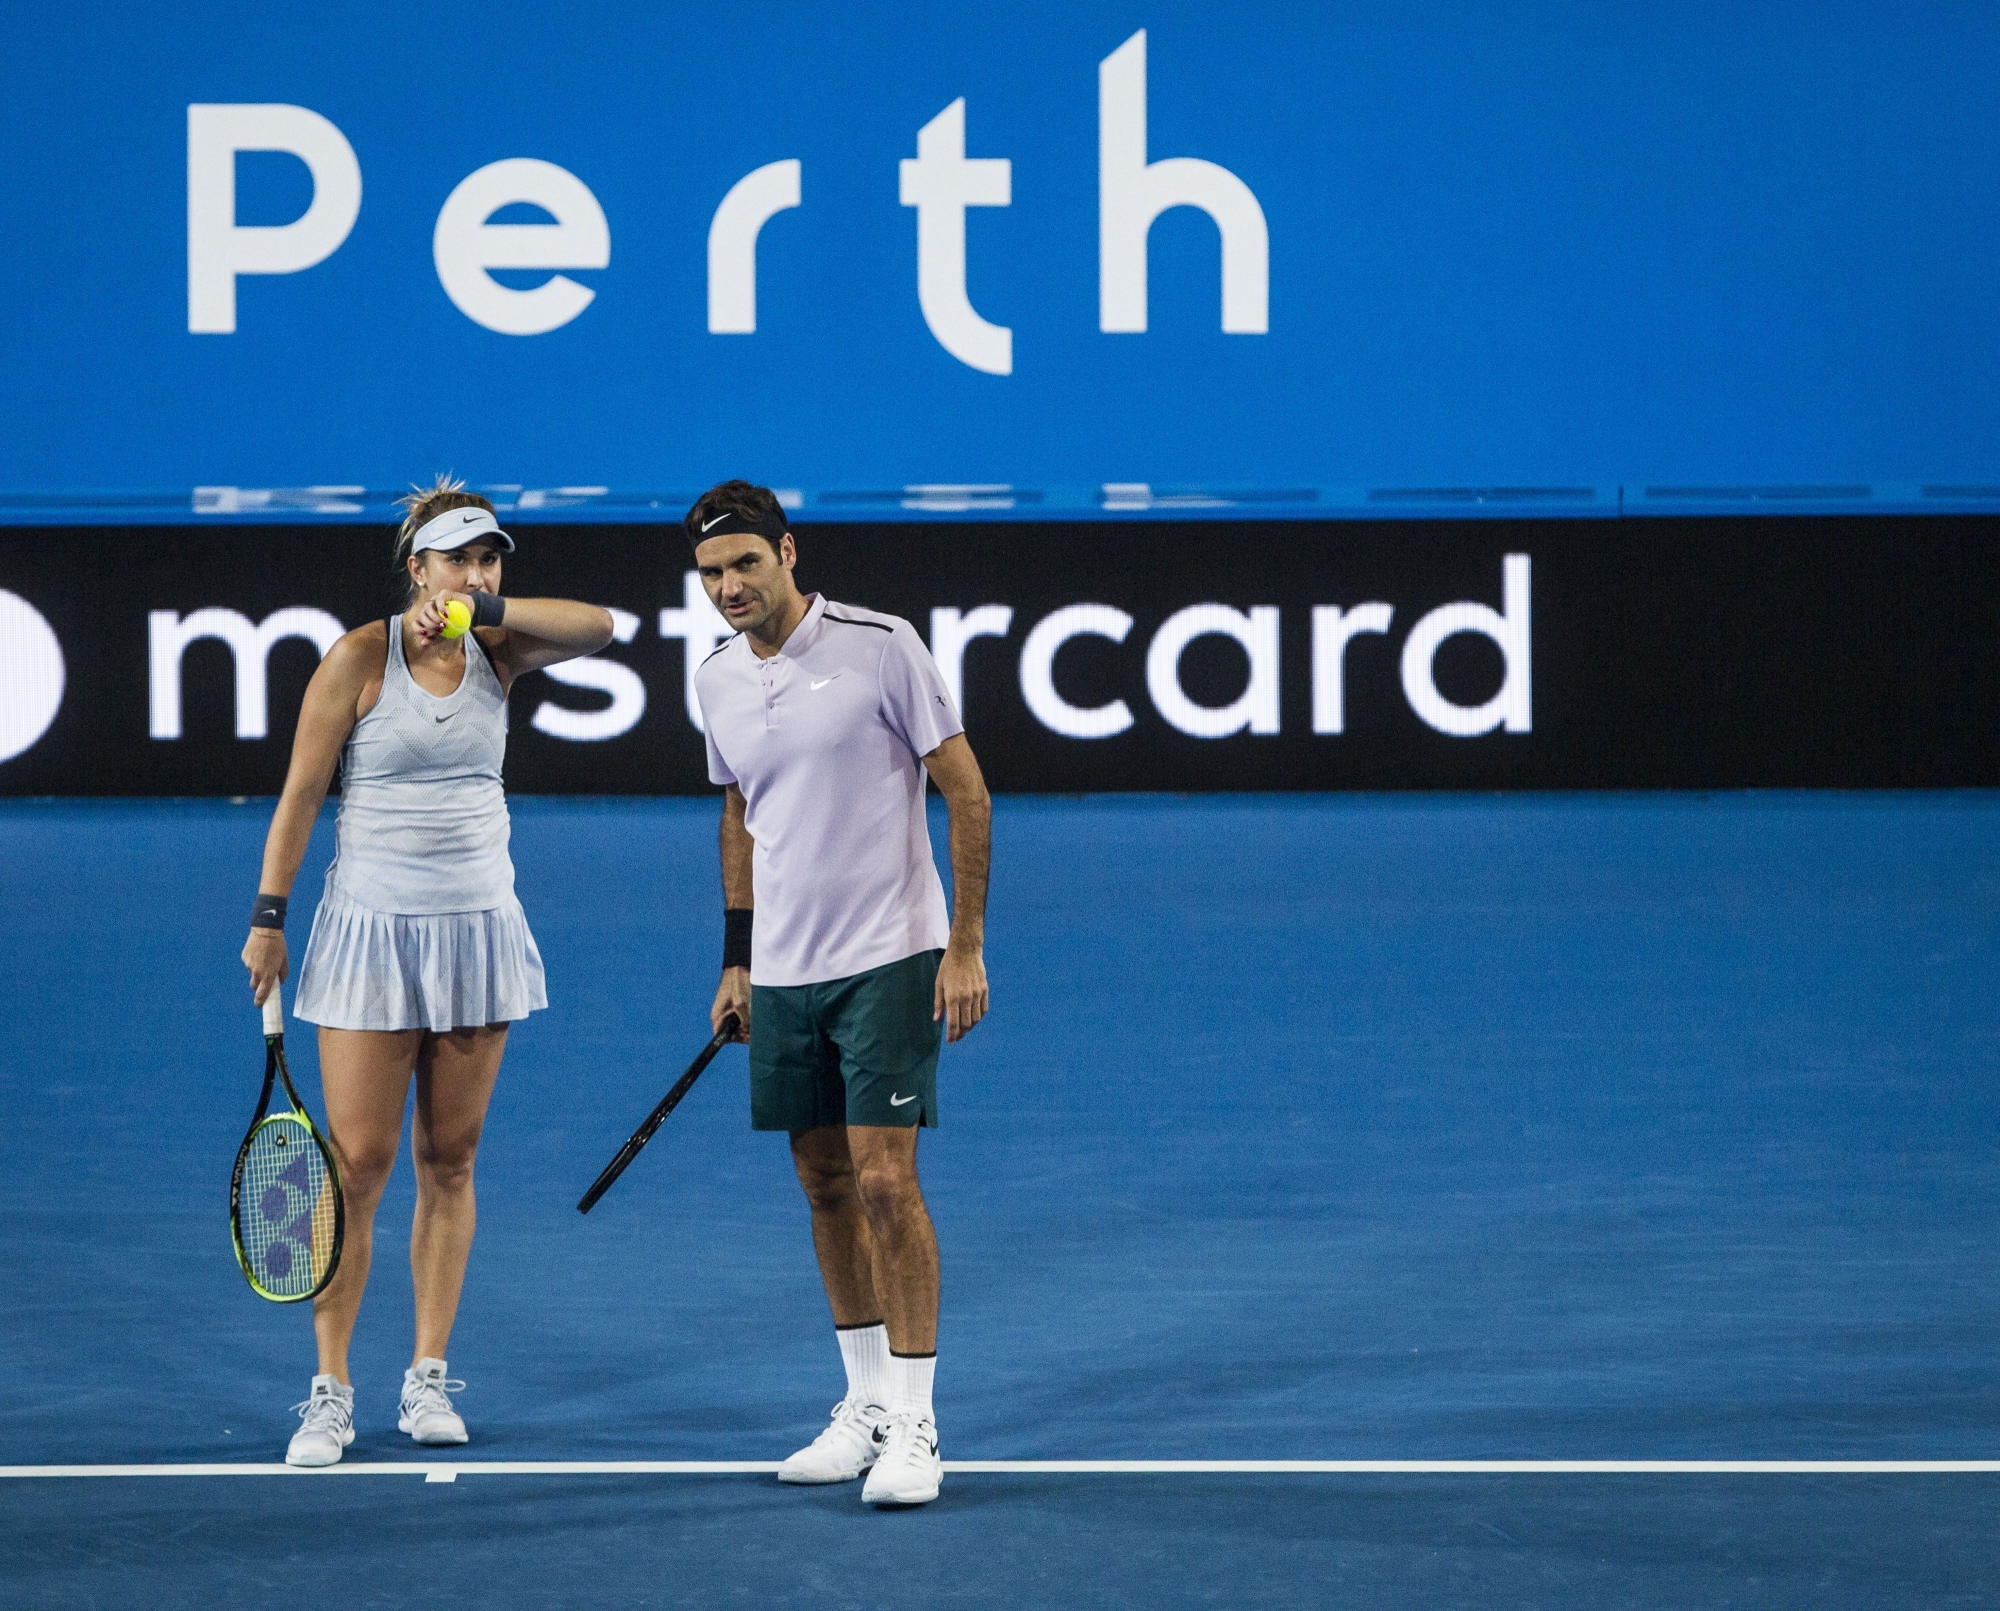 epa06413919 Belinda Bencic and Roger Federer (R) of Switzerland during their mixed doubles match against Karen Khachanov and Anastasia Pavlyuchenkova of Russia on day 4 of the Hopman Cup tennis tournament at Perth Arena in Perth, Western Australia, Australia, 02 January 2018.  EPA/TONY MCDONOUGH EDITORIAL USE ONLY AUSTRALIA AND NEW ZEALAND OUT